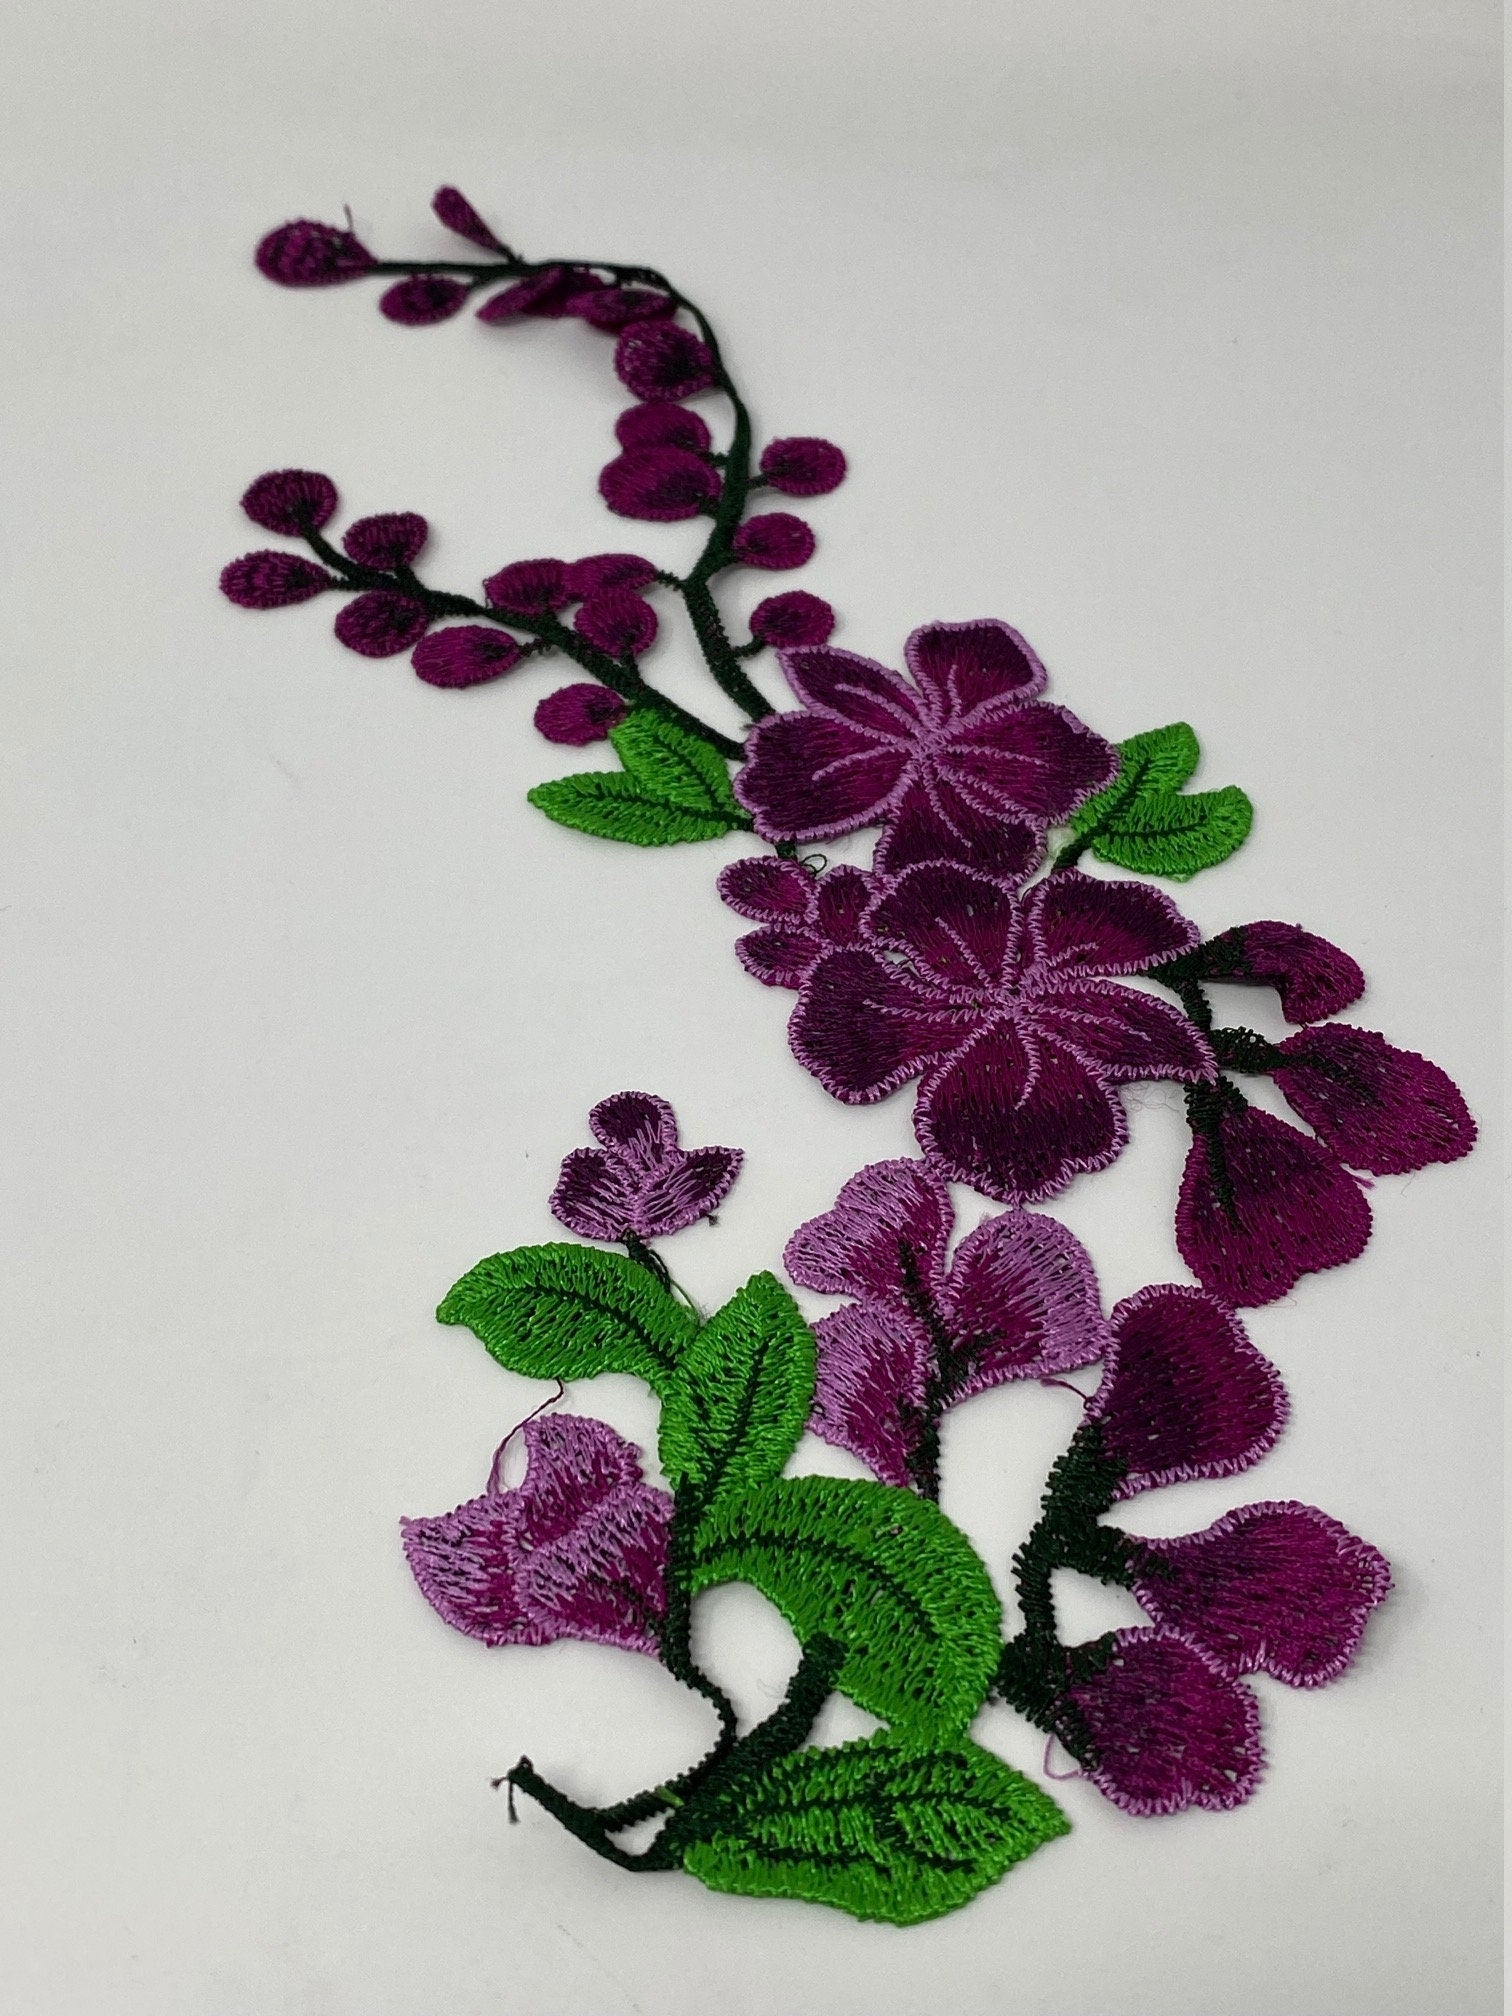 NEW, 2 Pc., Purple Lace Flowers with Leaves and Stems, Sew-on Lace Flower Set, Great for Shoes, Denim,Jackets, Sweaters, Etc. Size 12 inches